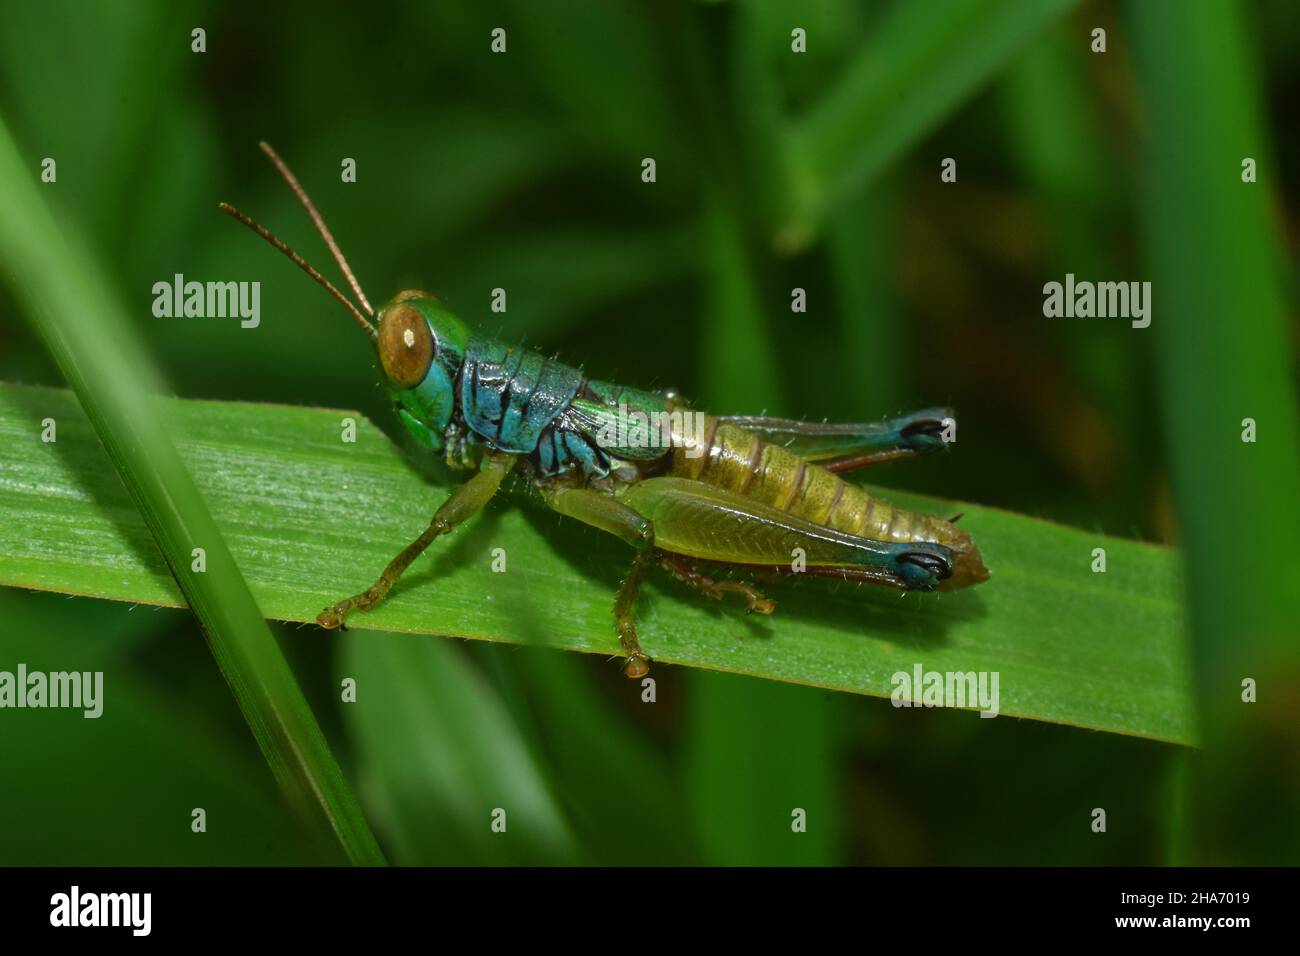 Caryanda spuria is a species of short-horned grasshopper in the family Acrididae. It is found mainly in Indonesia, Singapore, and Malaysia. Stock Photo